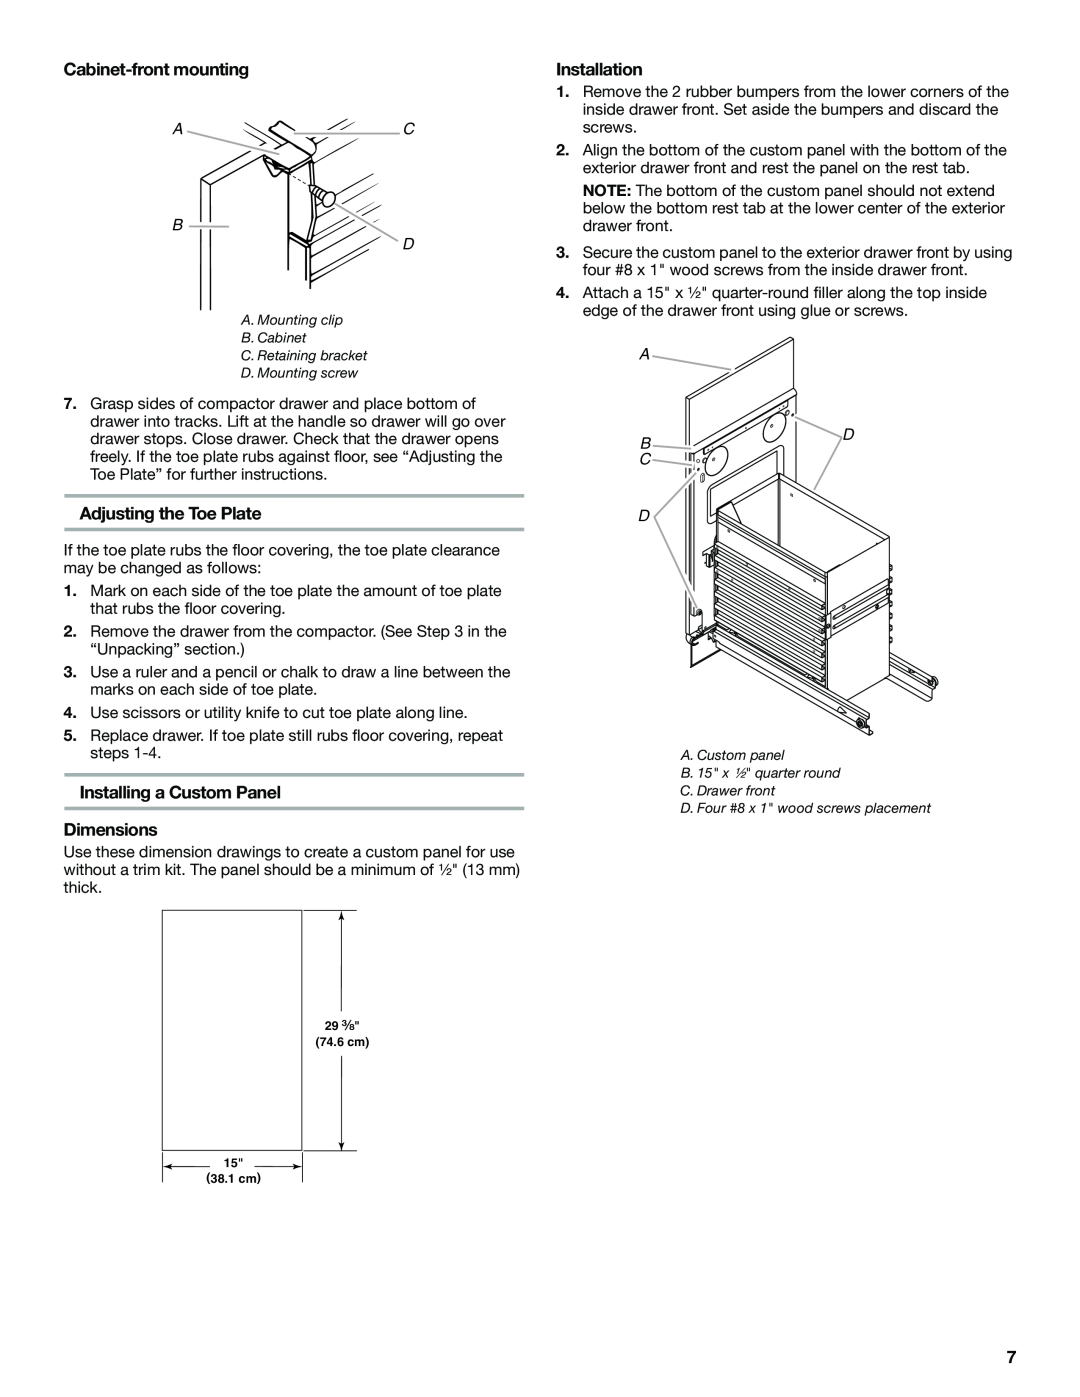 Jenn-Air W10242571A Cabinet-front mounting, Installation, Adjusting the Toe Plate, Installing a Custom Panel Dimensions 